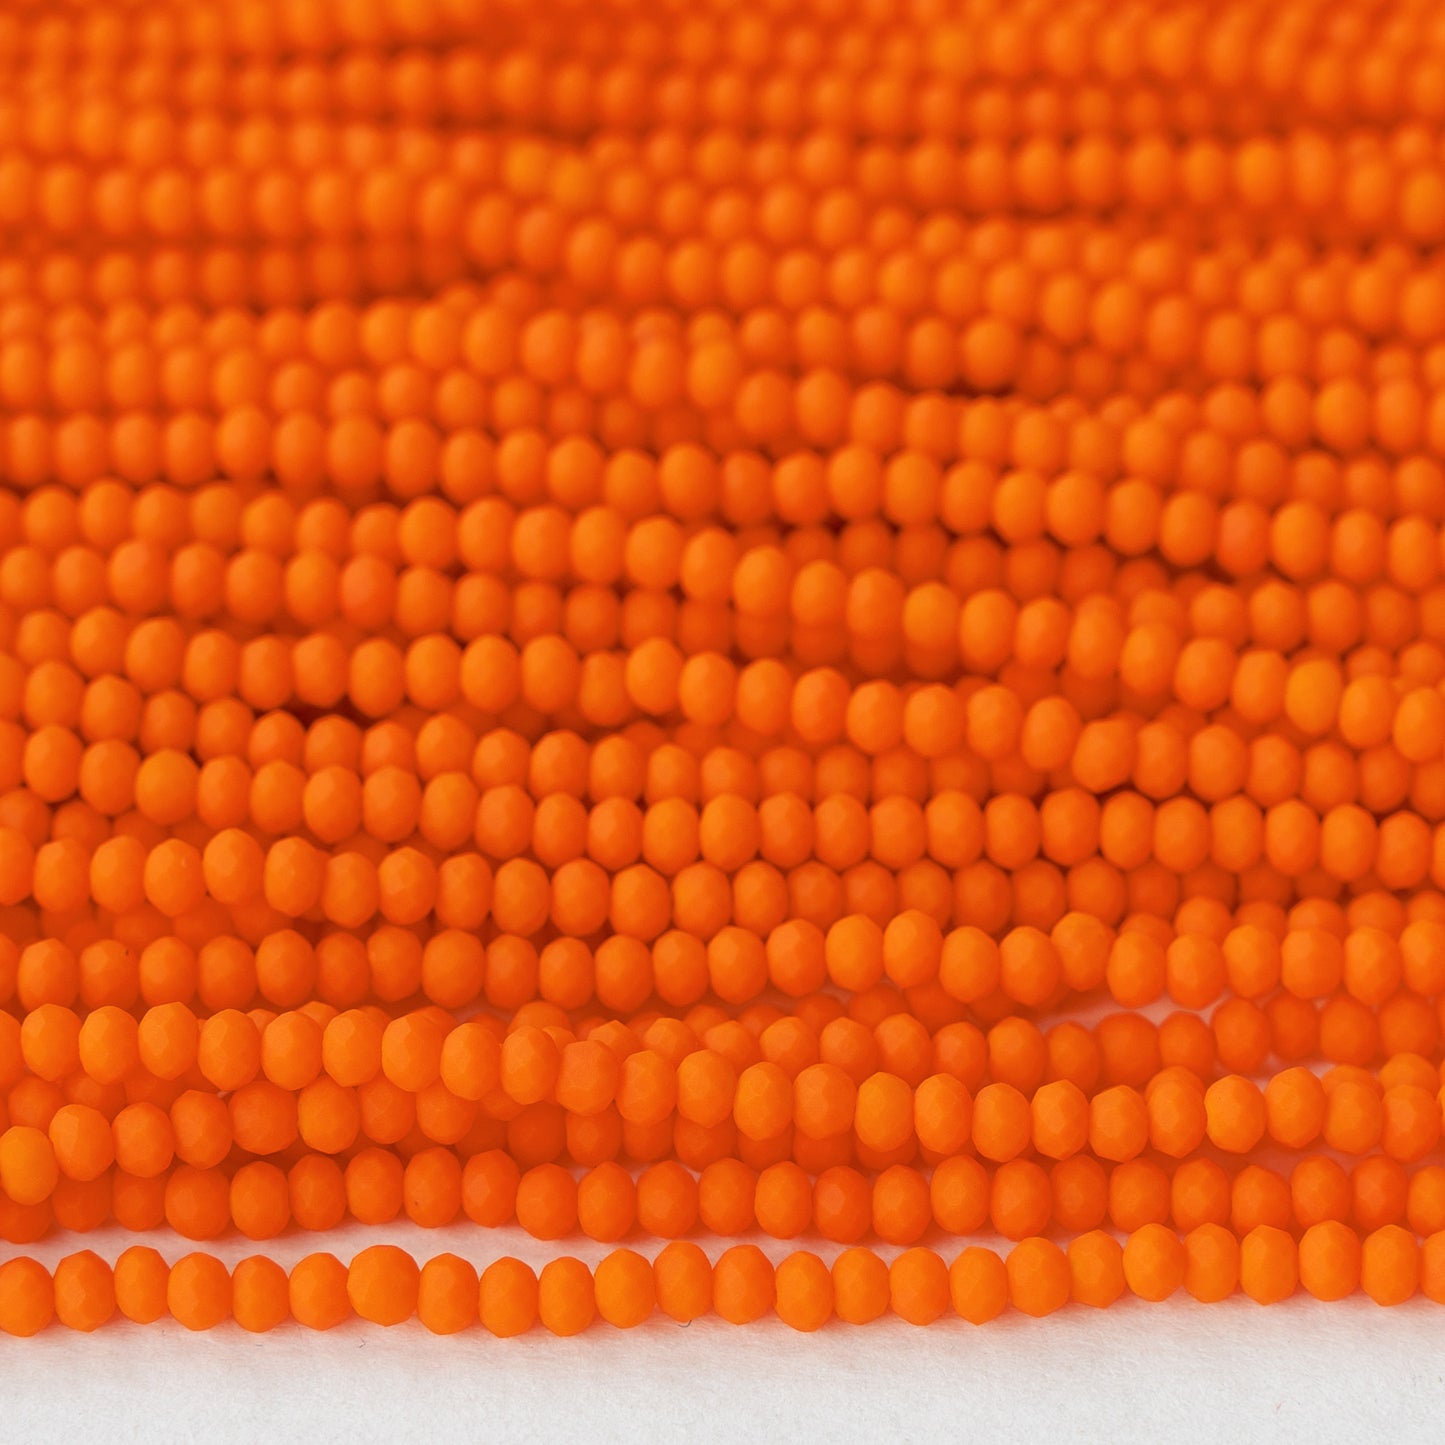 3x2mm Faceted Glass Rondelles - Tangerine ~ 200 Beads - 16 inches